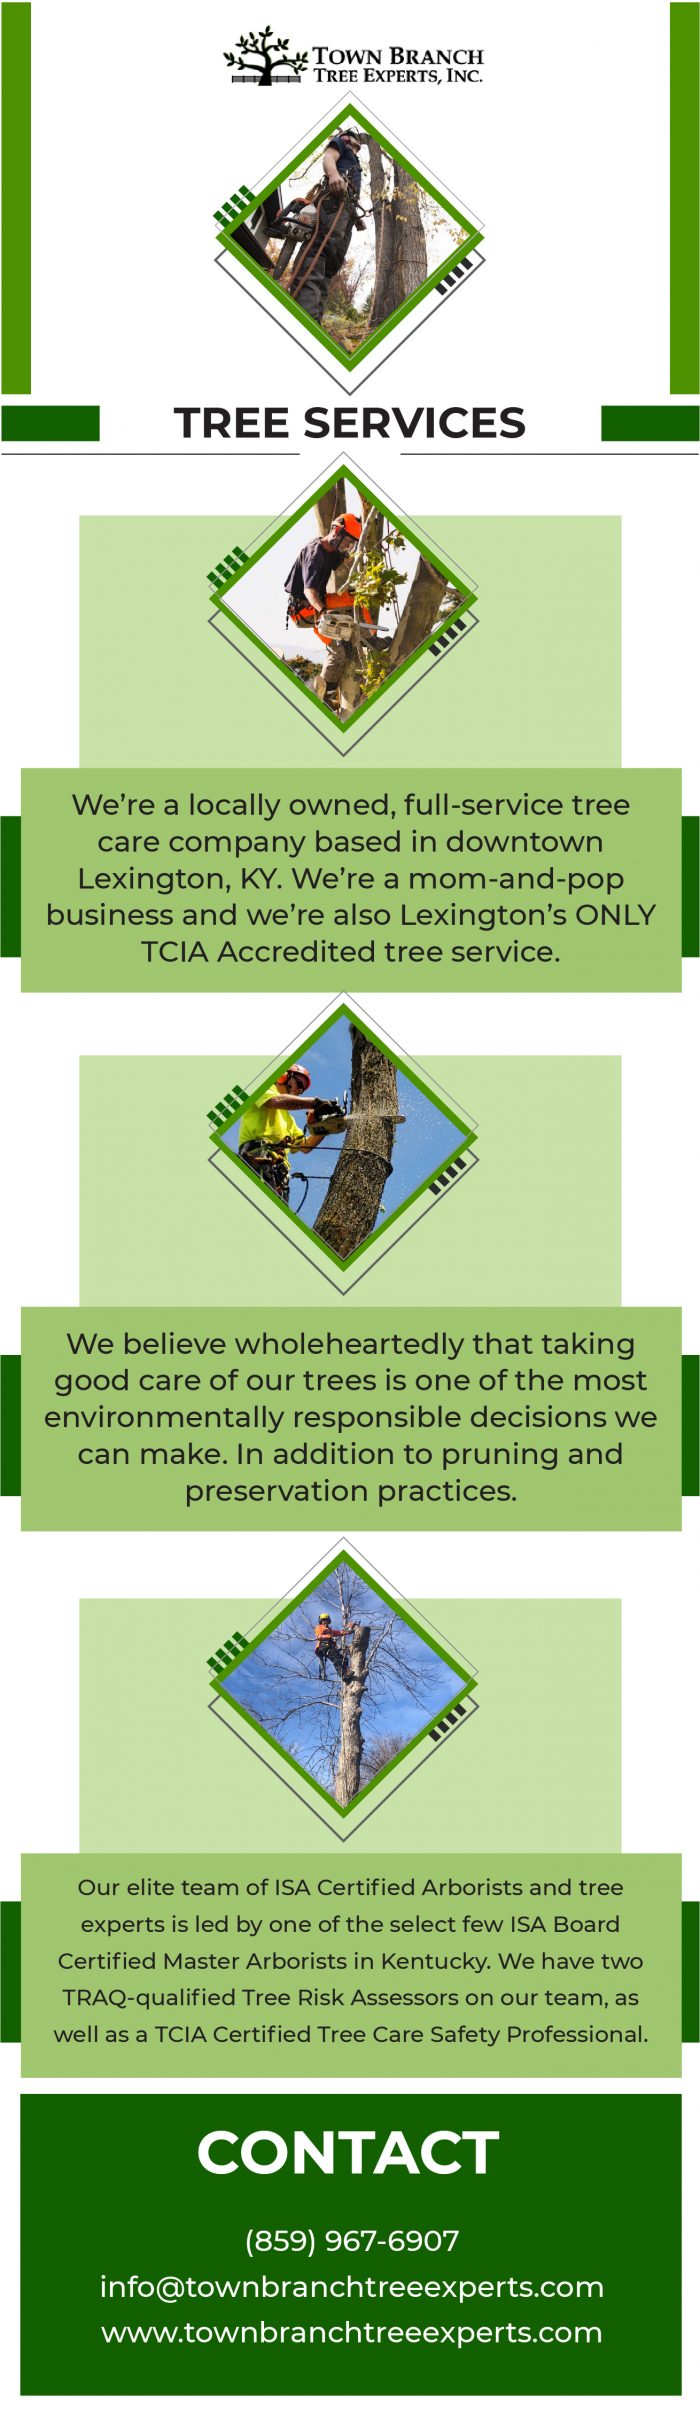 Top Most Tree Service in Lexington KY | Town Branch Tree Expert